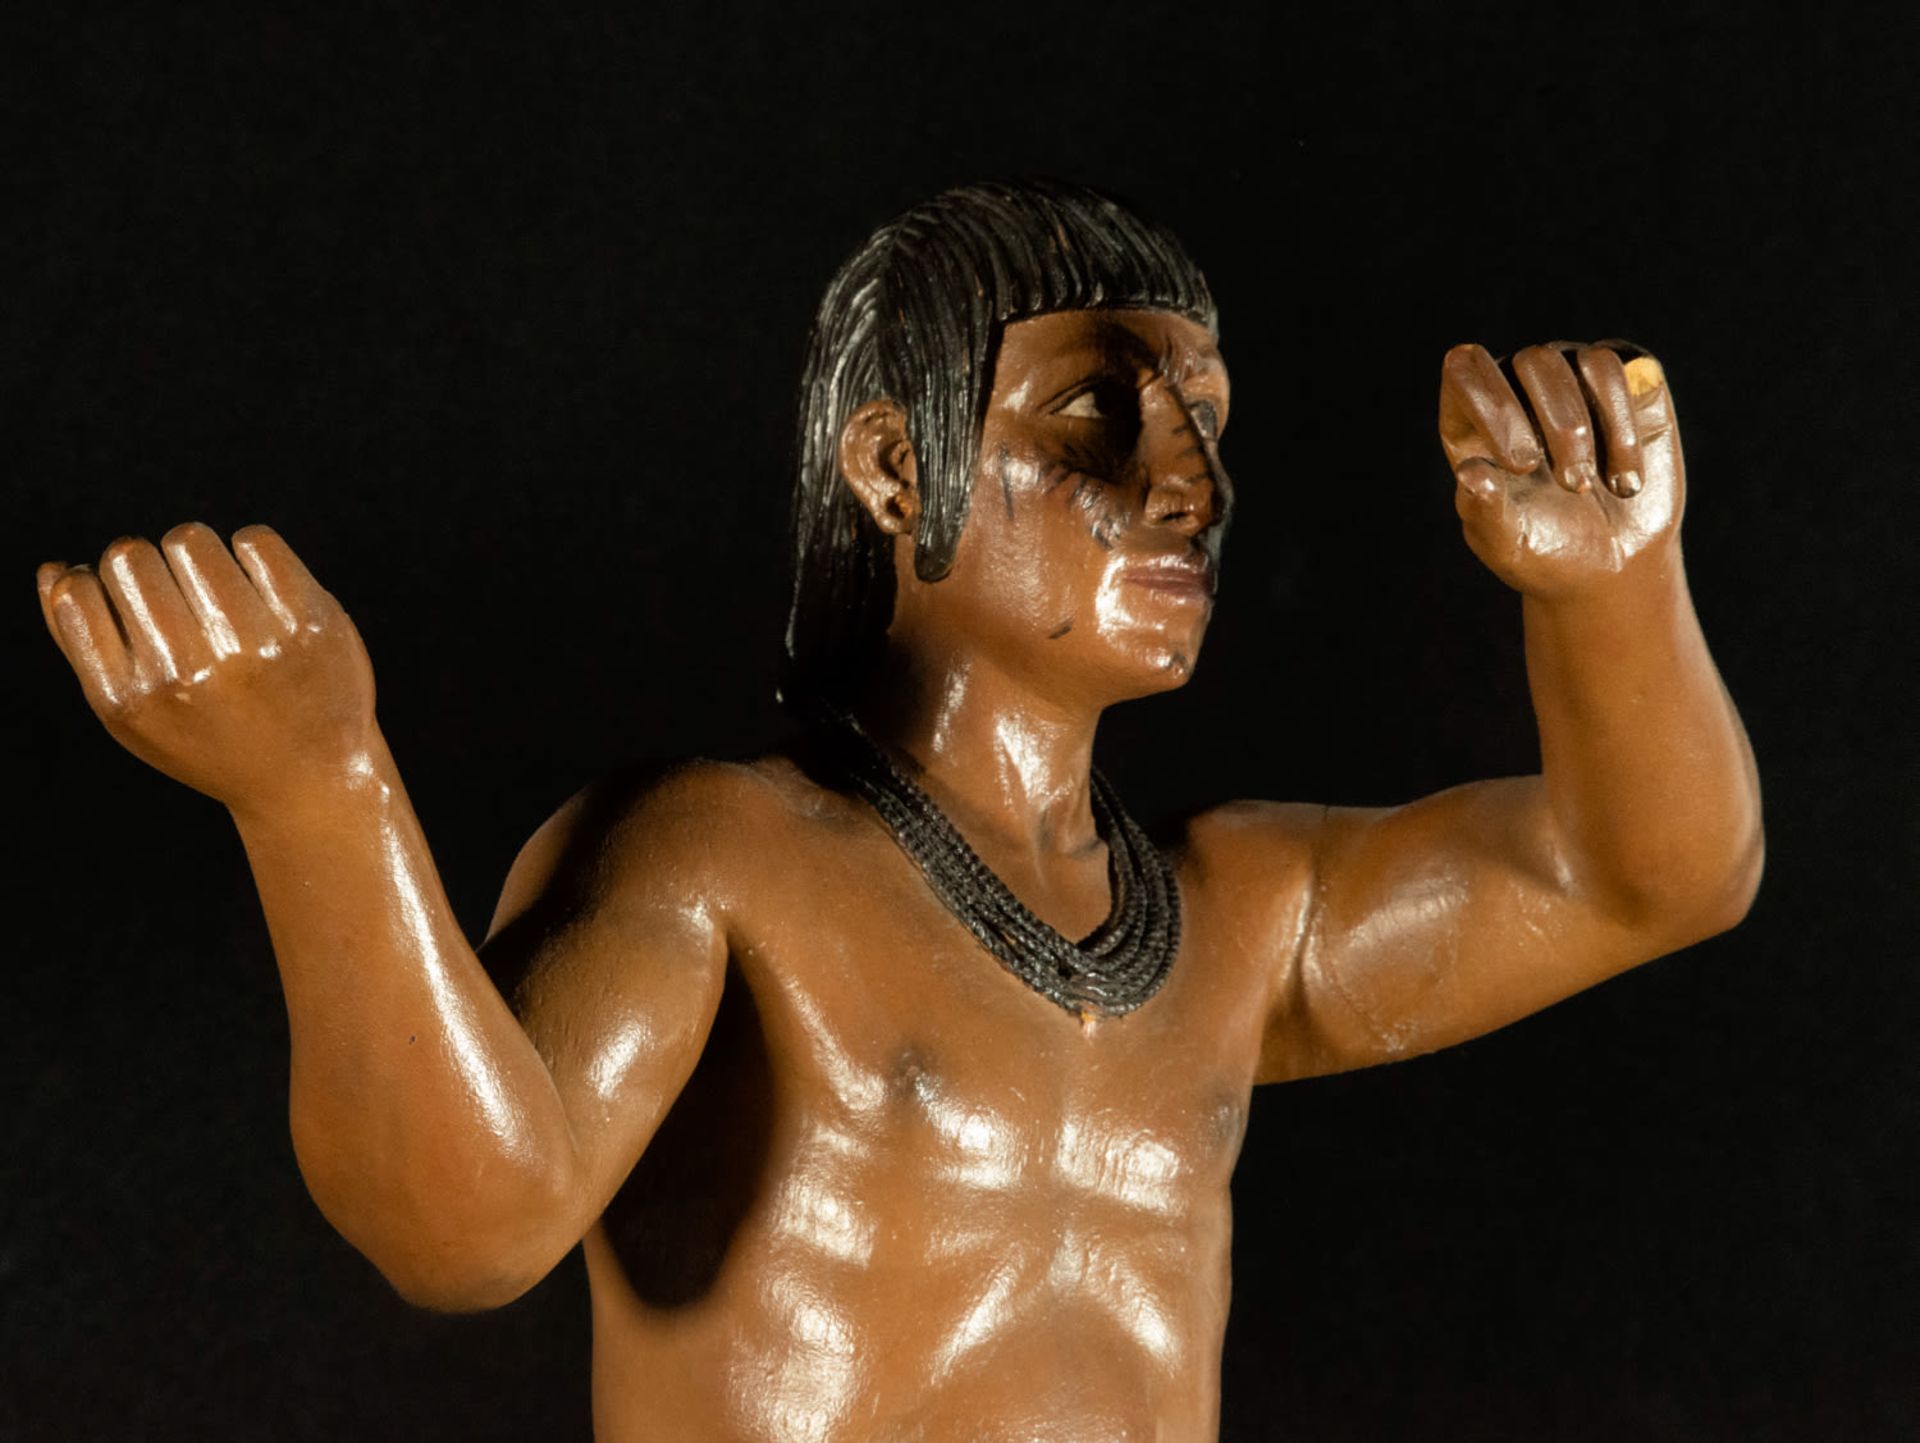 Galo Tobar, year 1974, Pair of exquisite sculptures of Matsés Indians from Brazil, 70s - Image 6 of 6